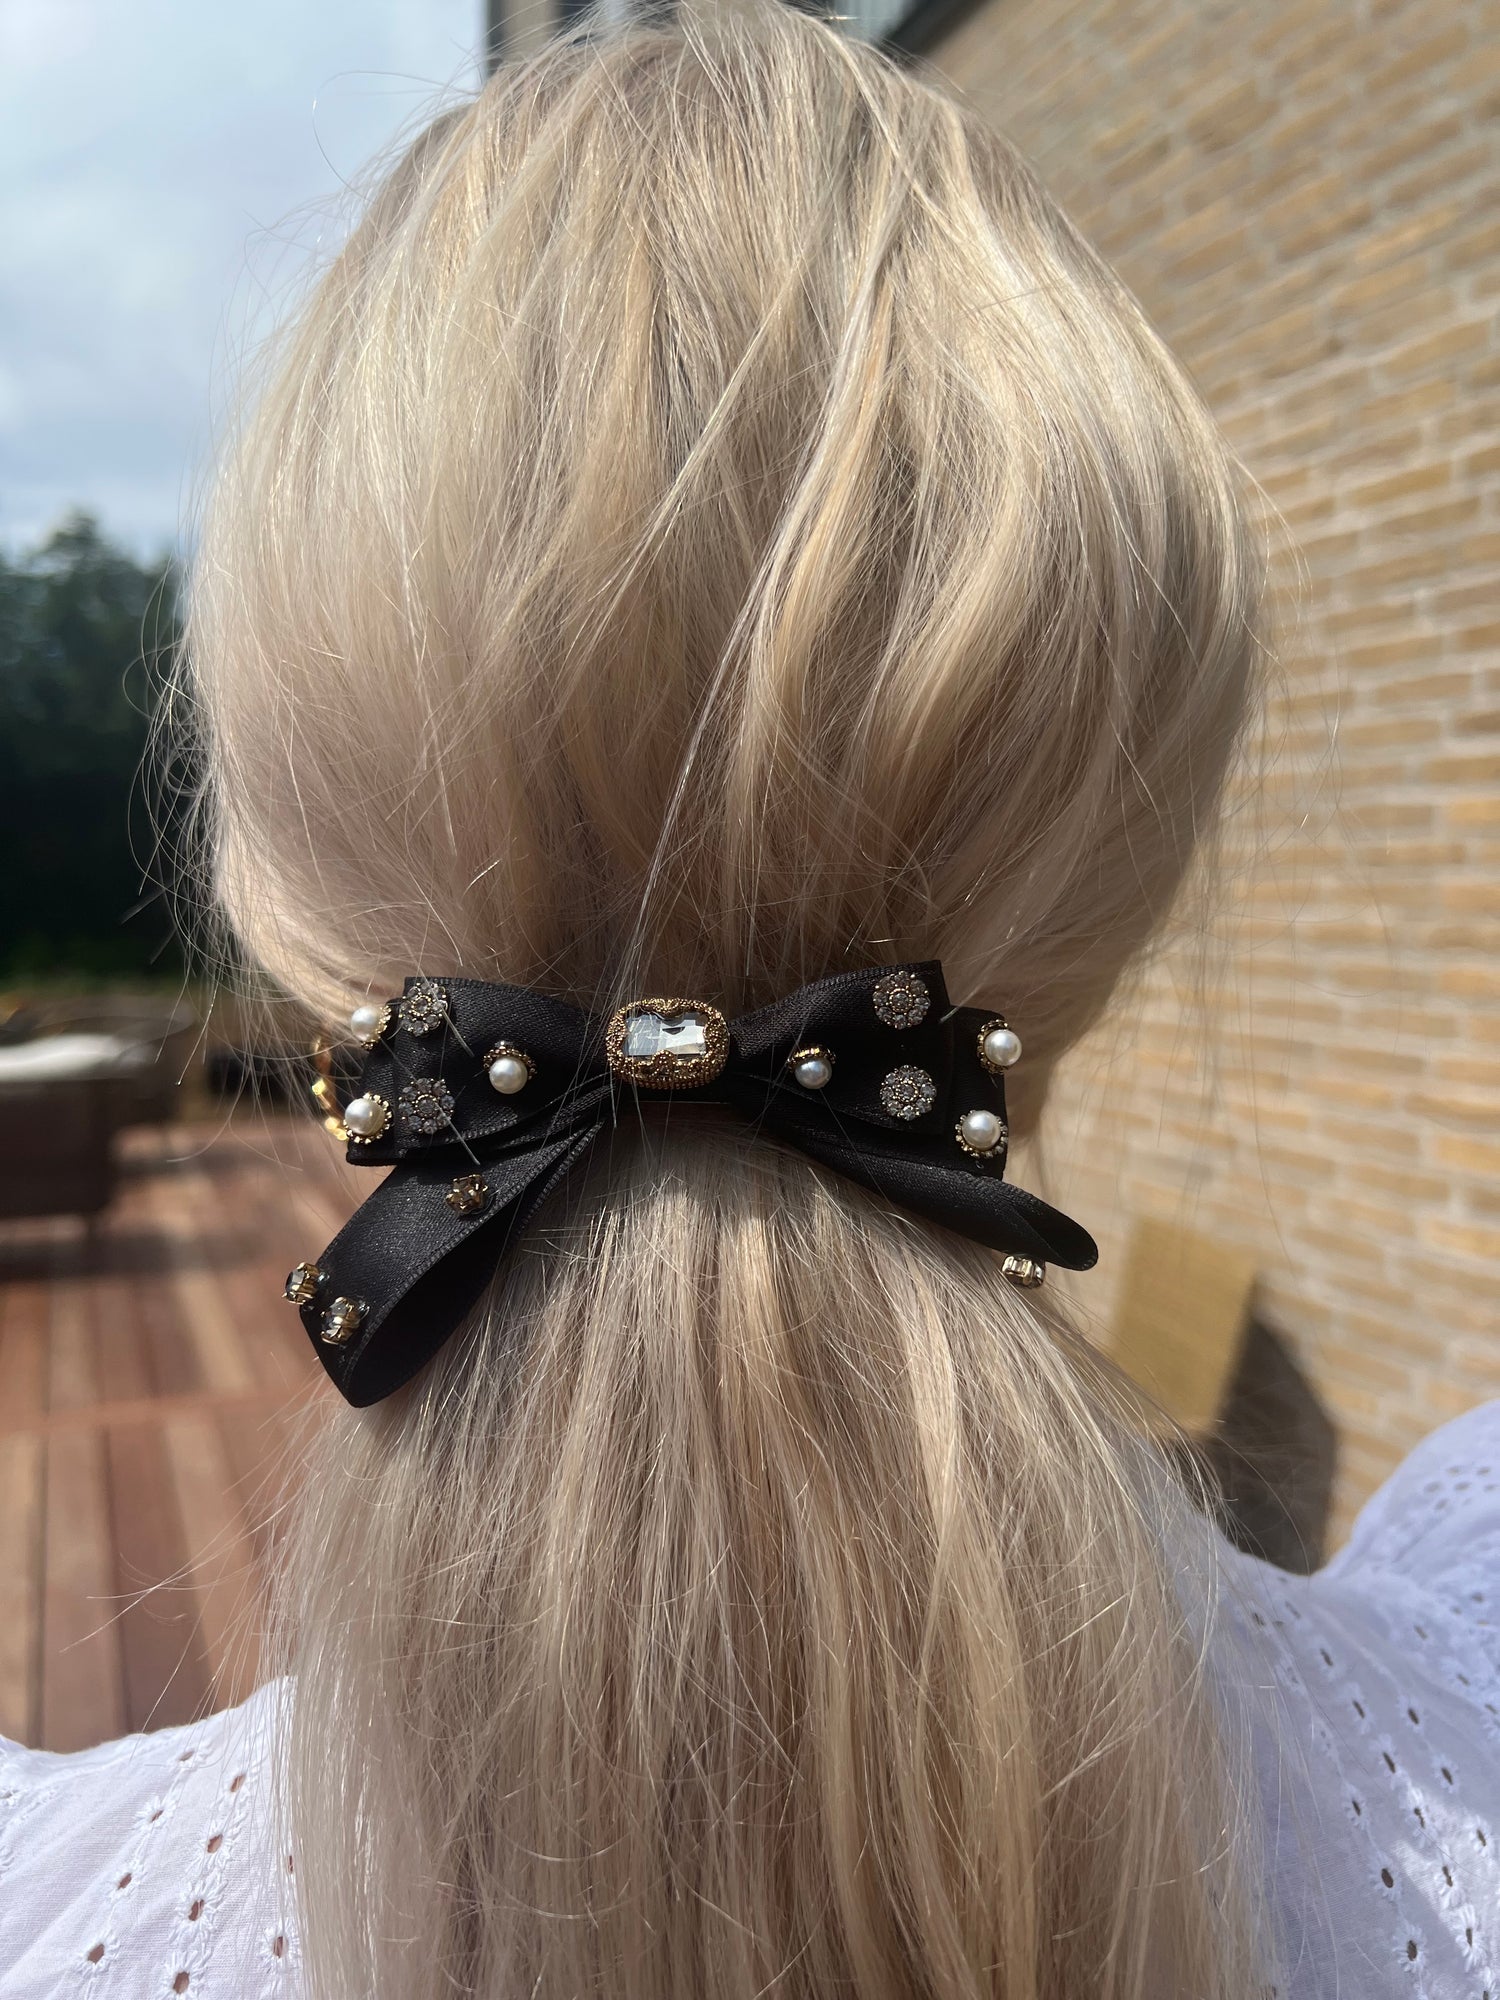 Barrette Hair Clip Bow - Black With Crystal